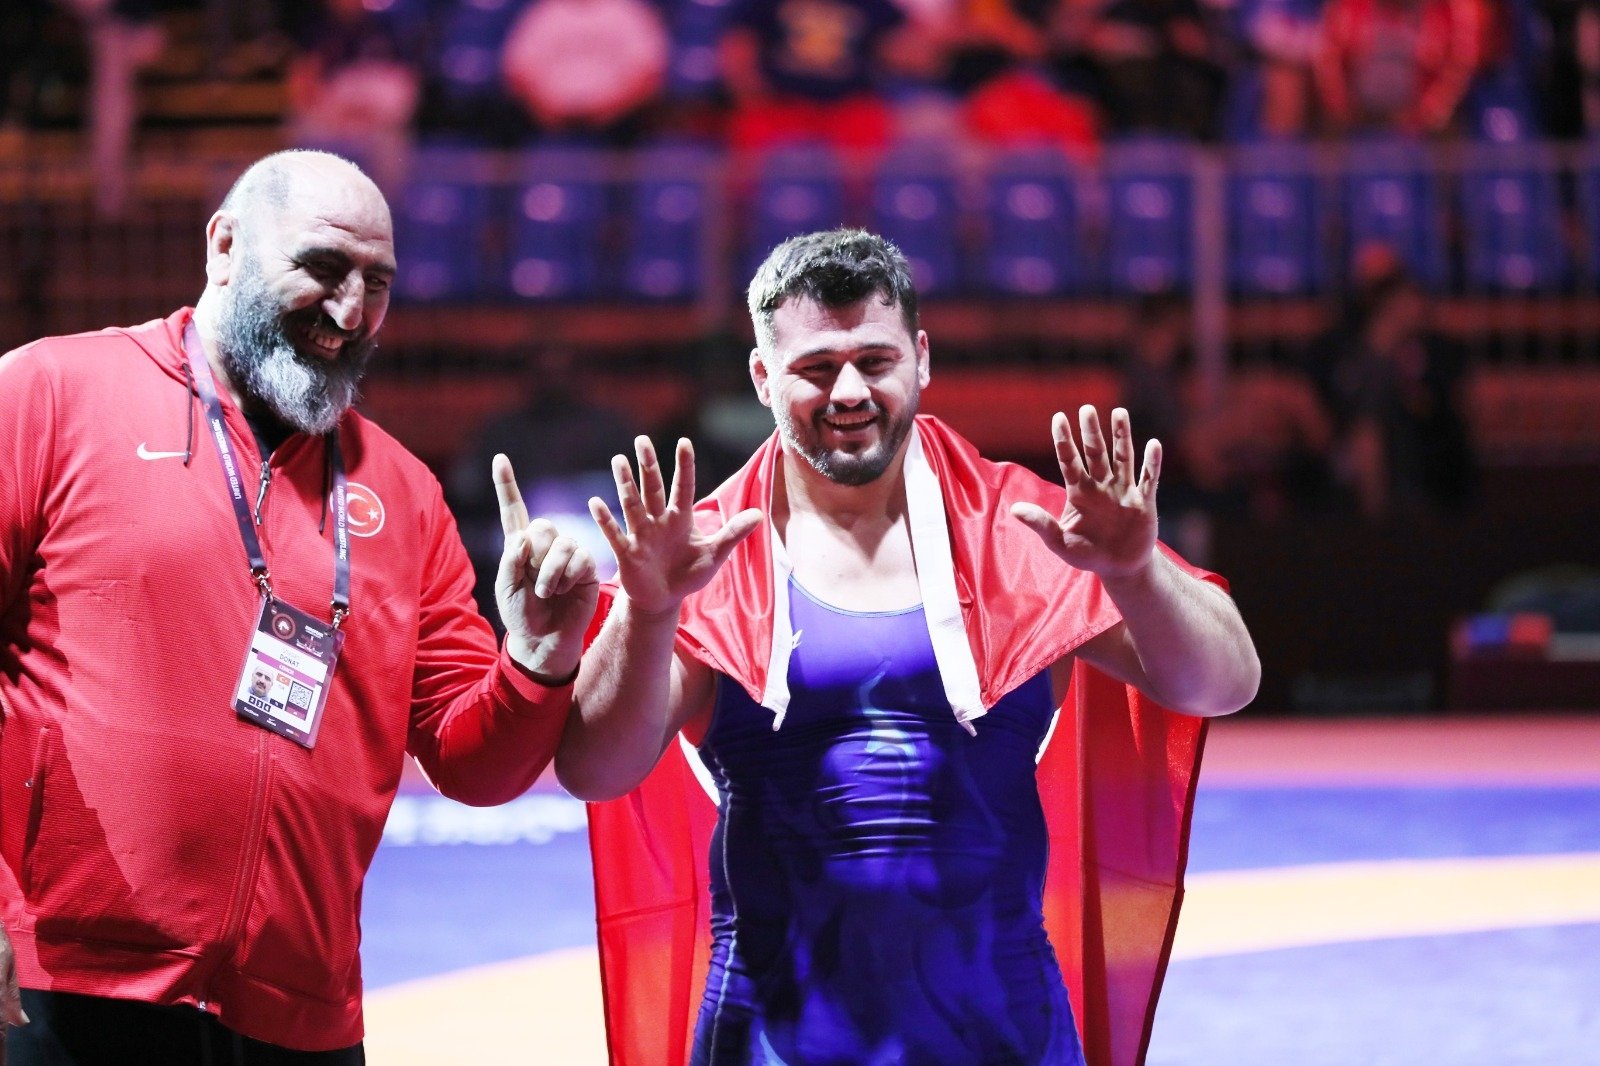 Turkish wrestler Rıza Kayaalp and a team member celebrate his 11th gold medal in the European Wrestling Championships in Budapest, Hungary, April 2, 2022. (DHA Photo)